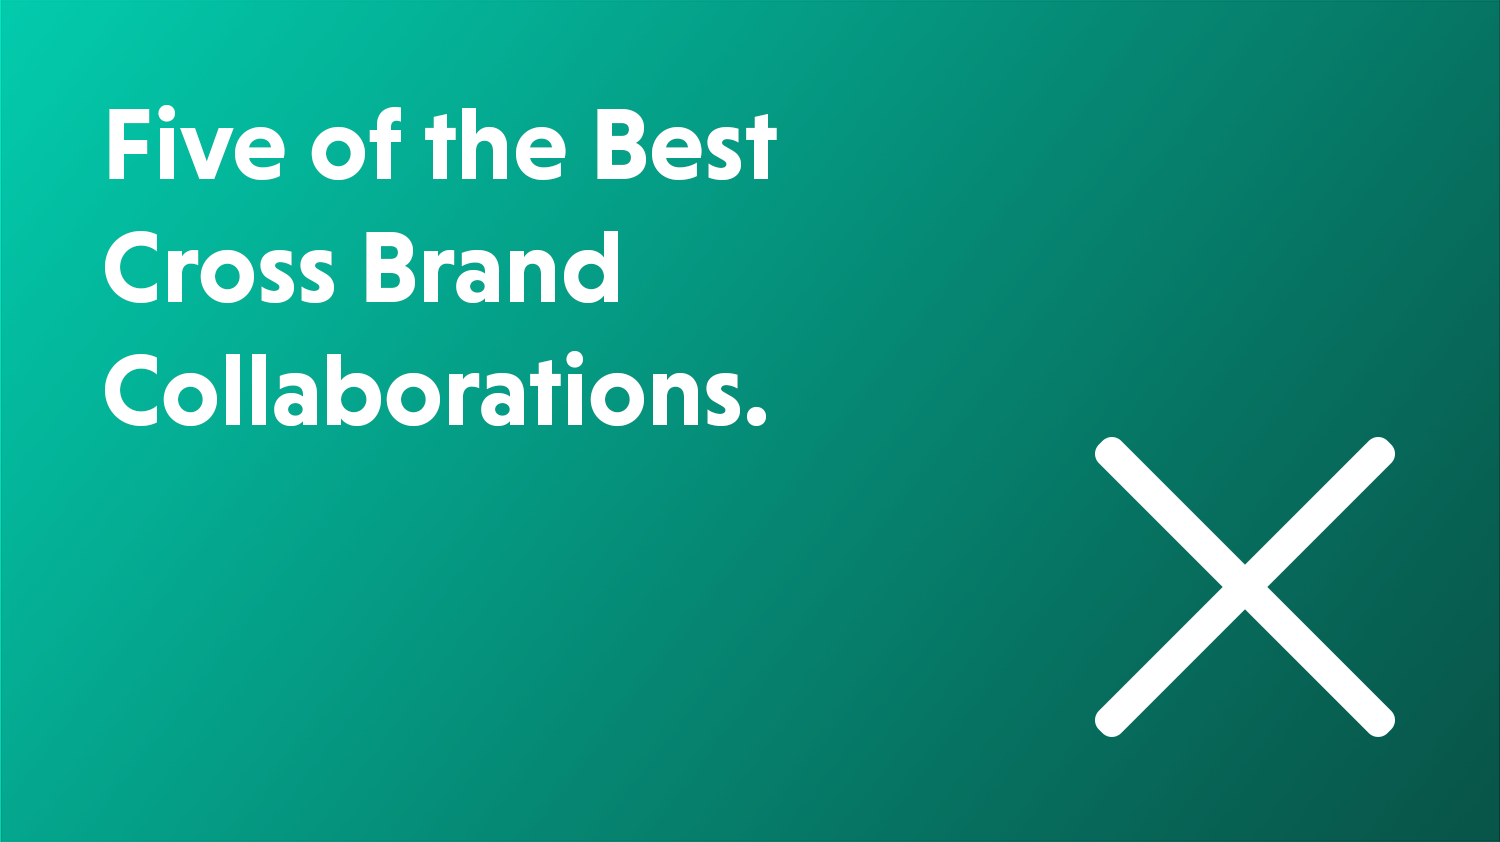 Blog cover artwork showing the title Five of The Best Cross Brand Collaborations